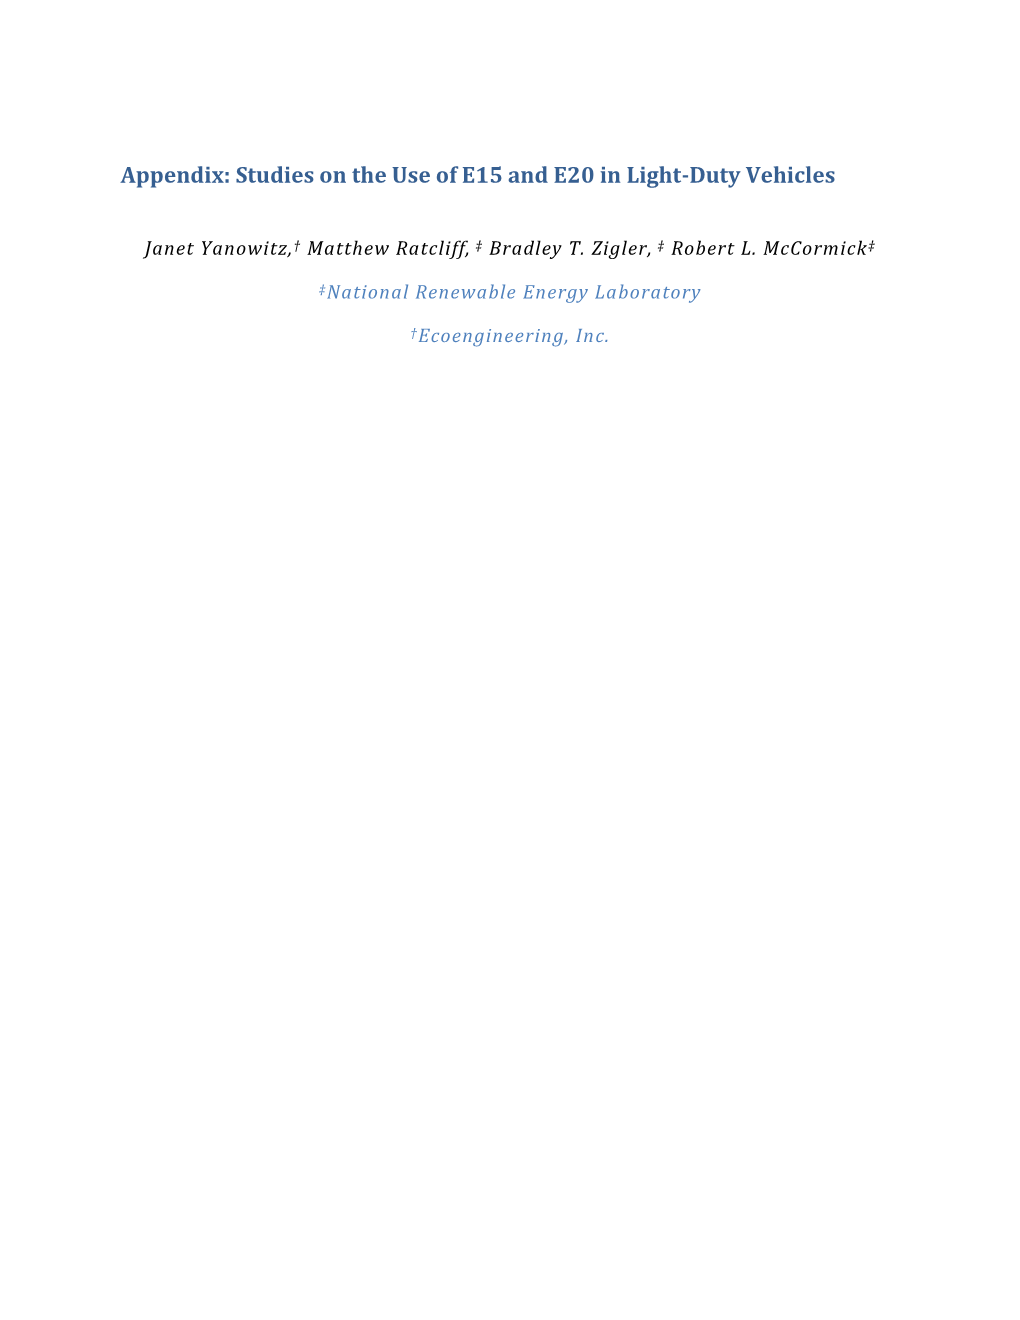 Appendix: Studies on the Use of E15 and E20 in Light-Duty Vehicles